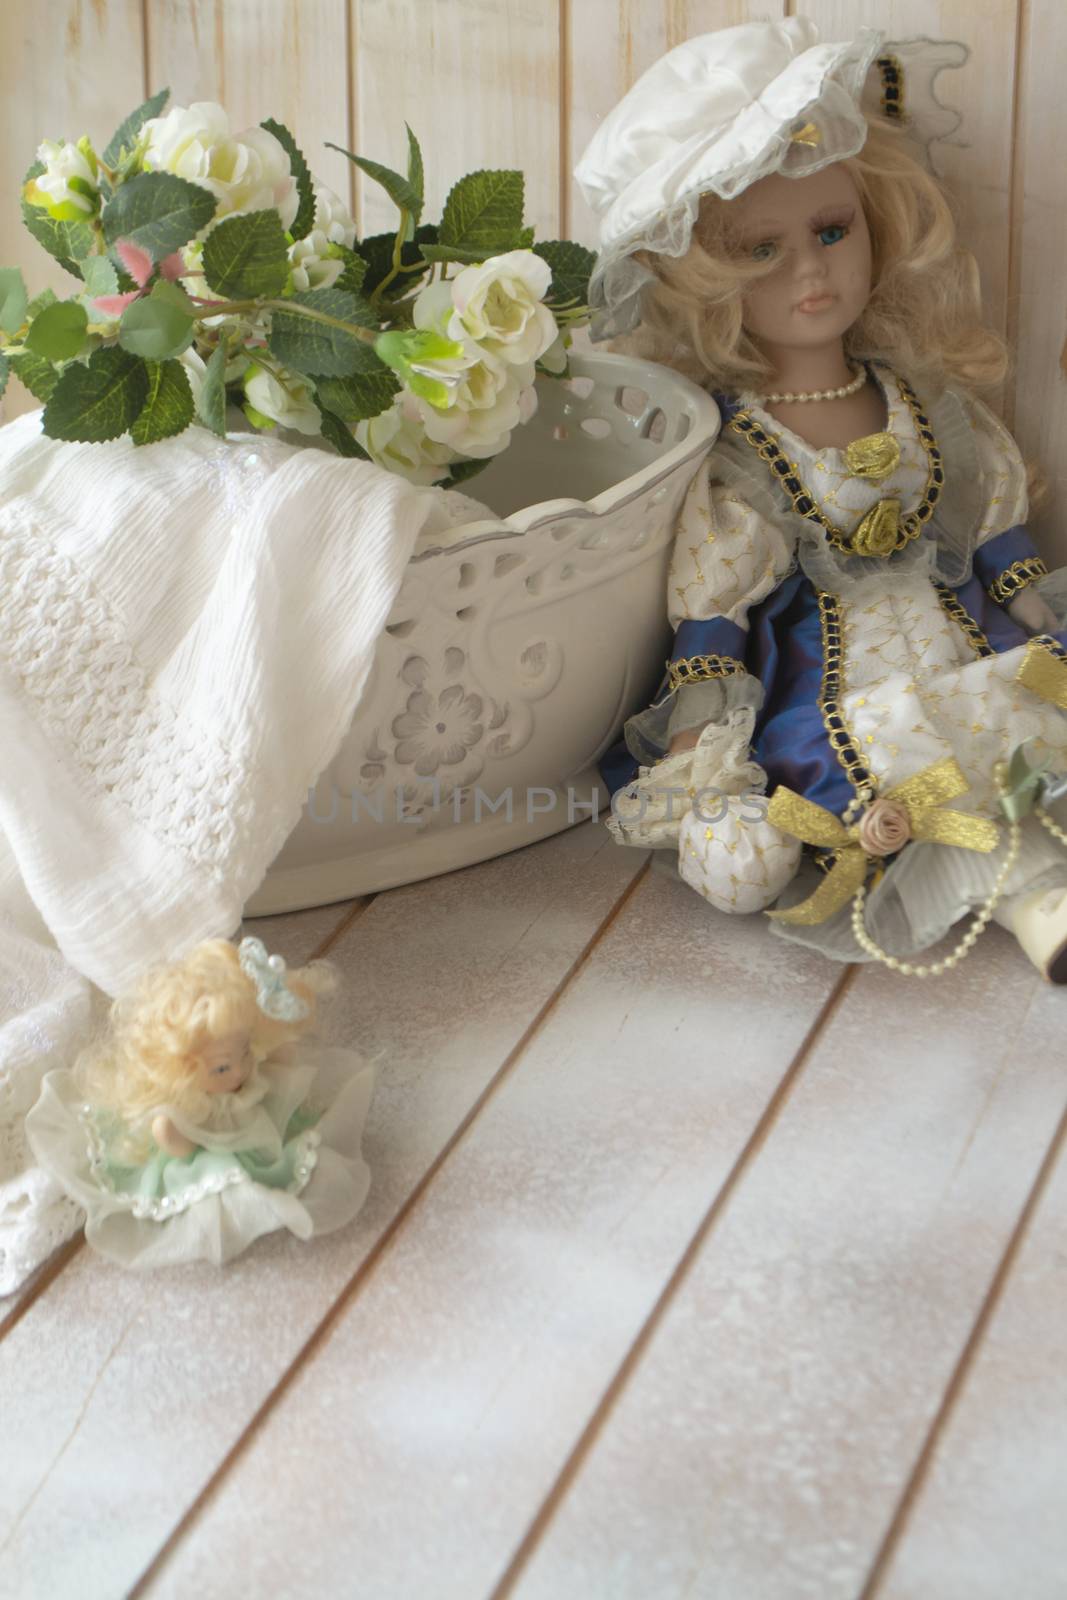 vintage porcelain doll in the shabby table. Porcelain doll in vintage interior.